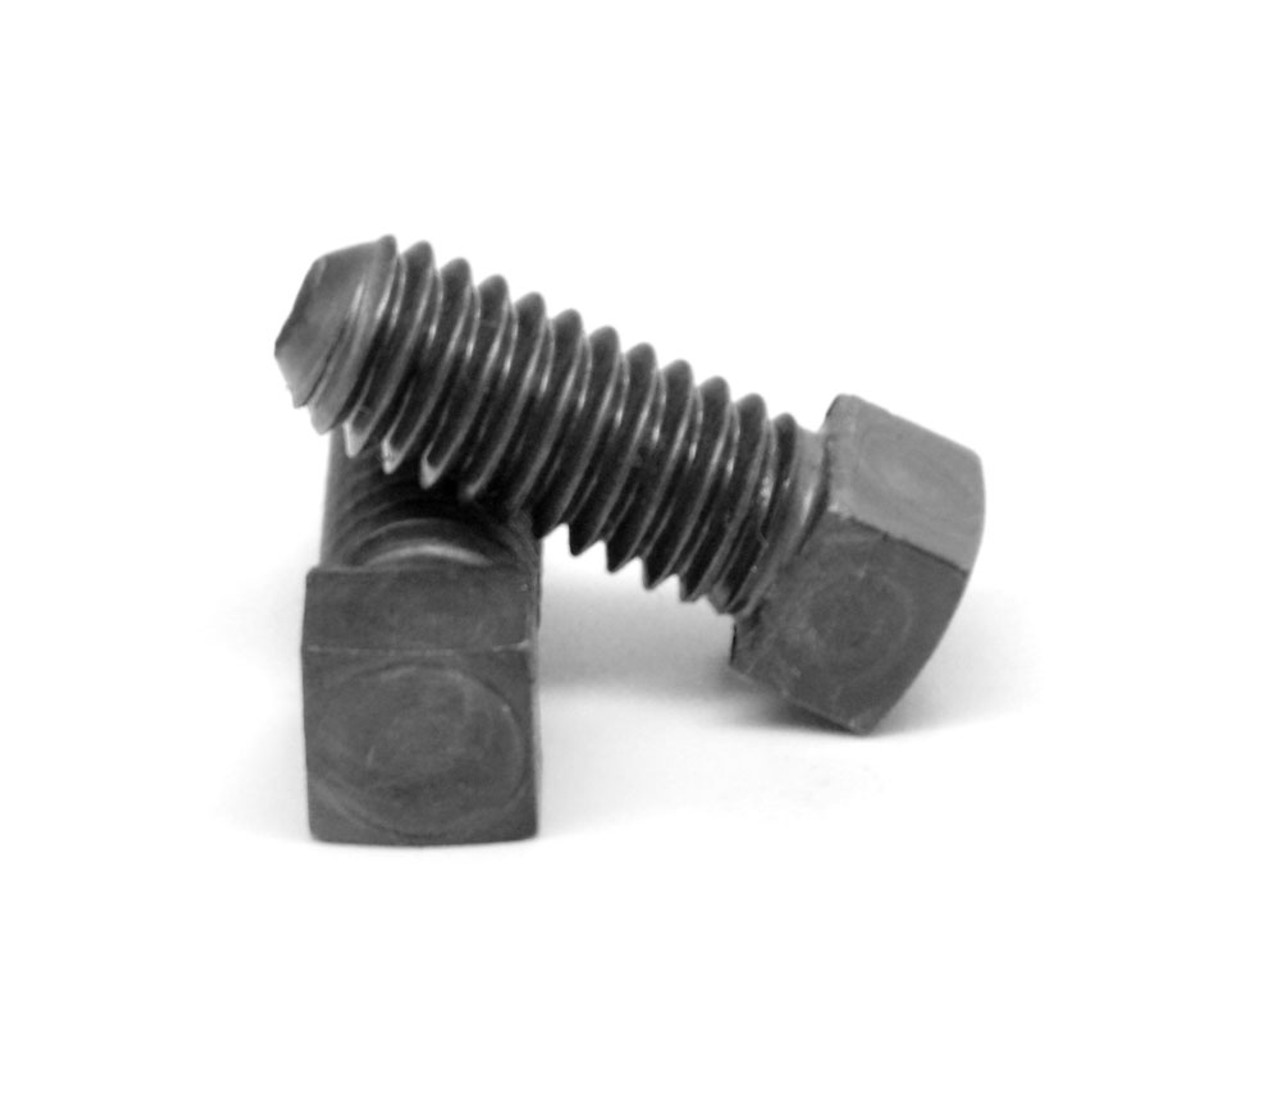 7/8"-9 x 4 1/2" (FT) Coarse Thread Square Head Set Screw Cup Point Low Carbon Steel Case Hardened Plain Finish